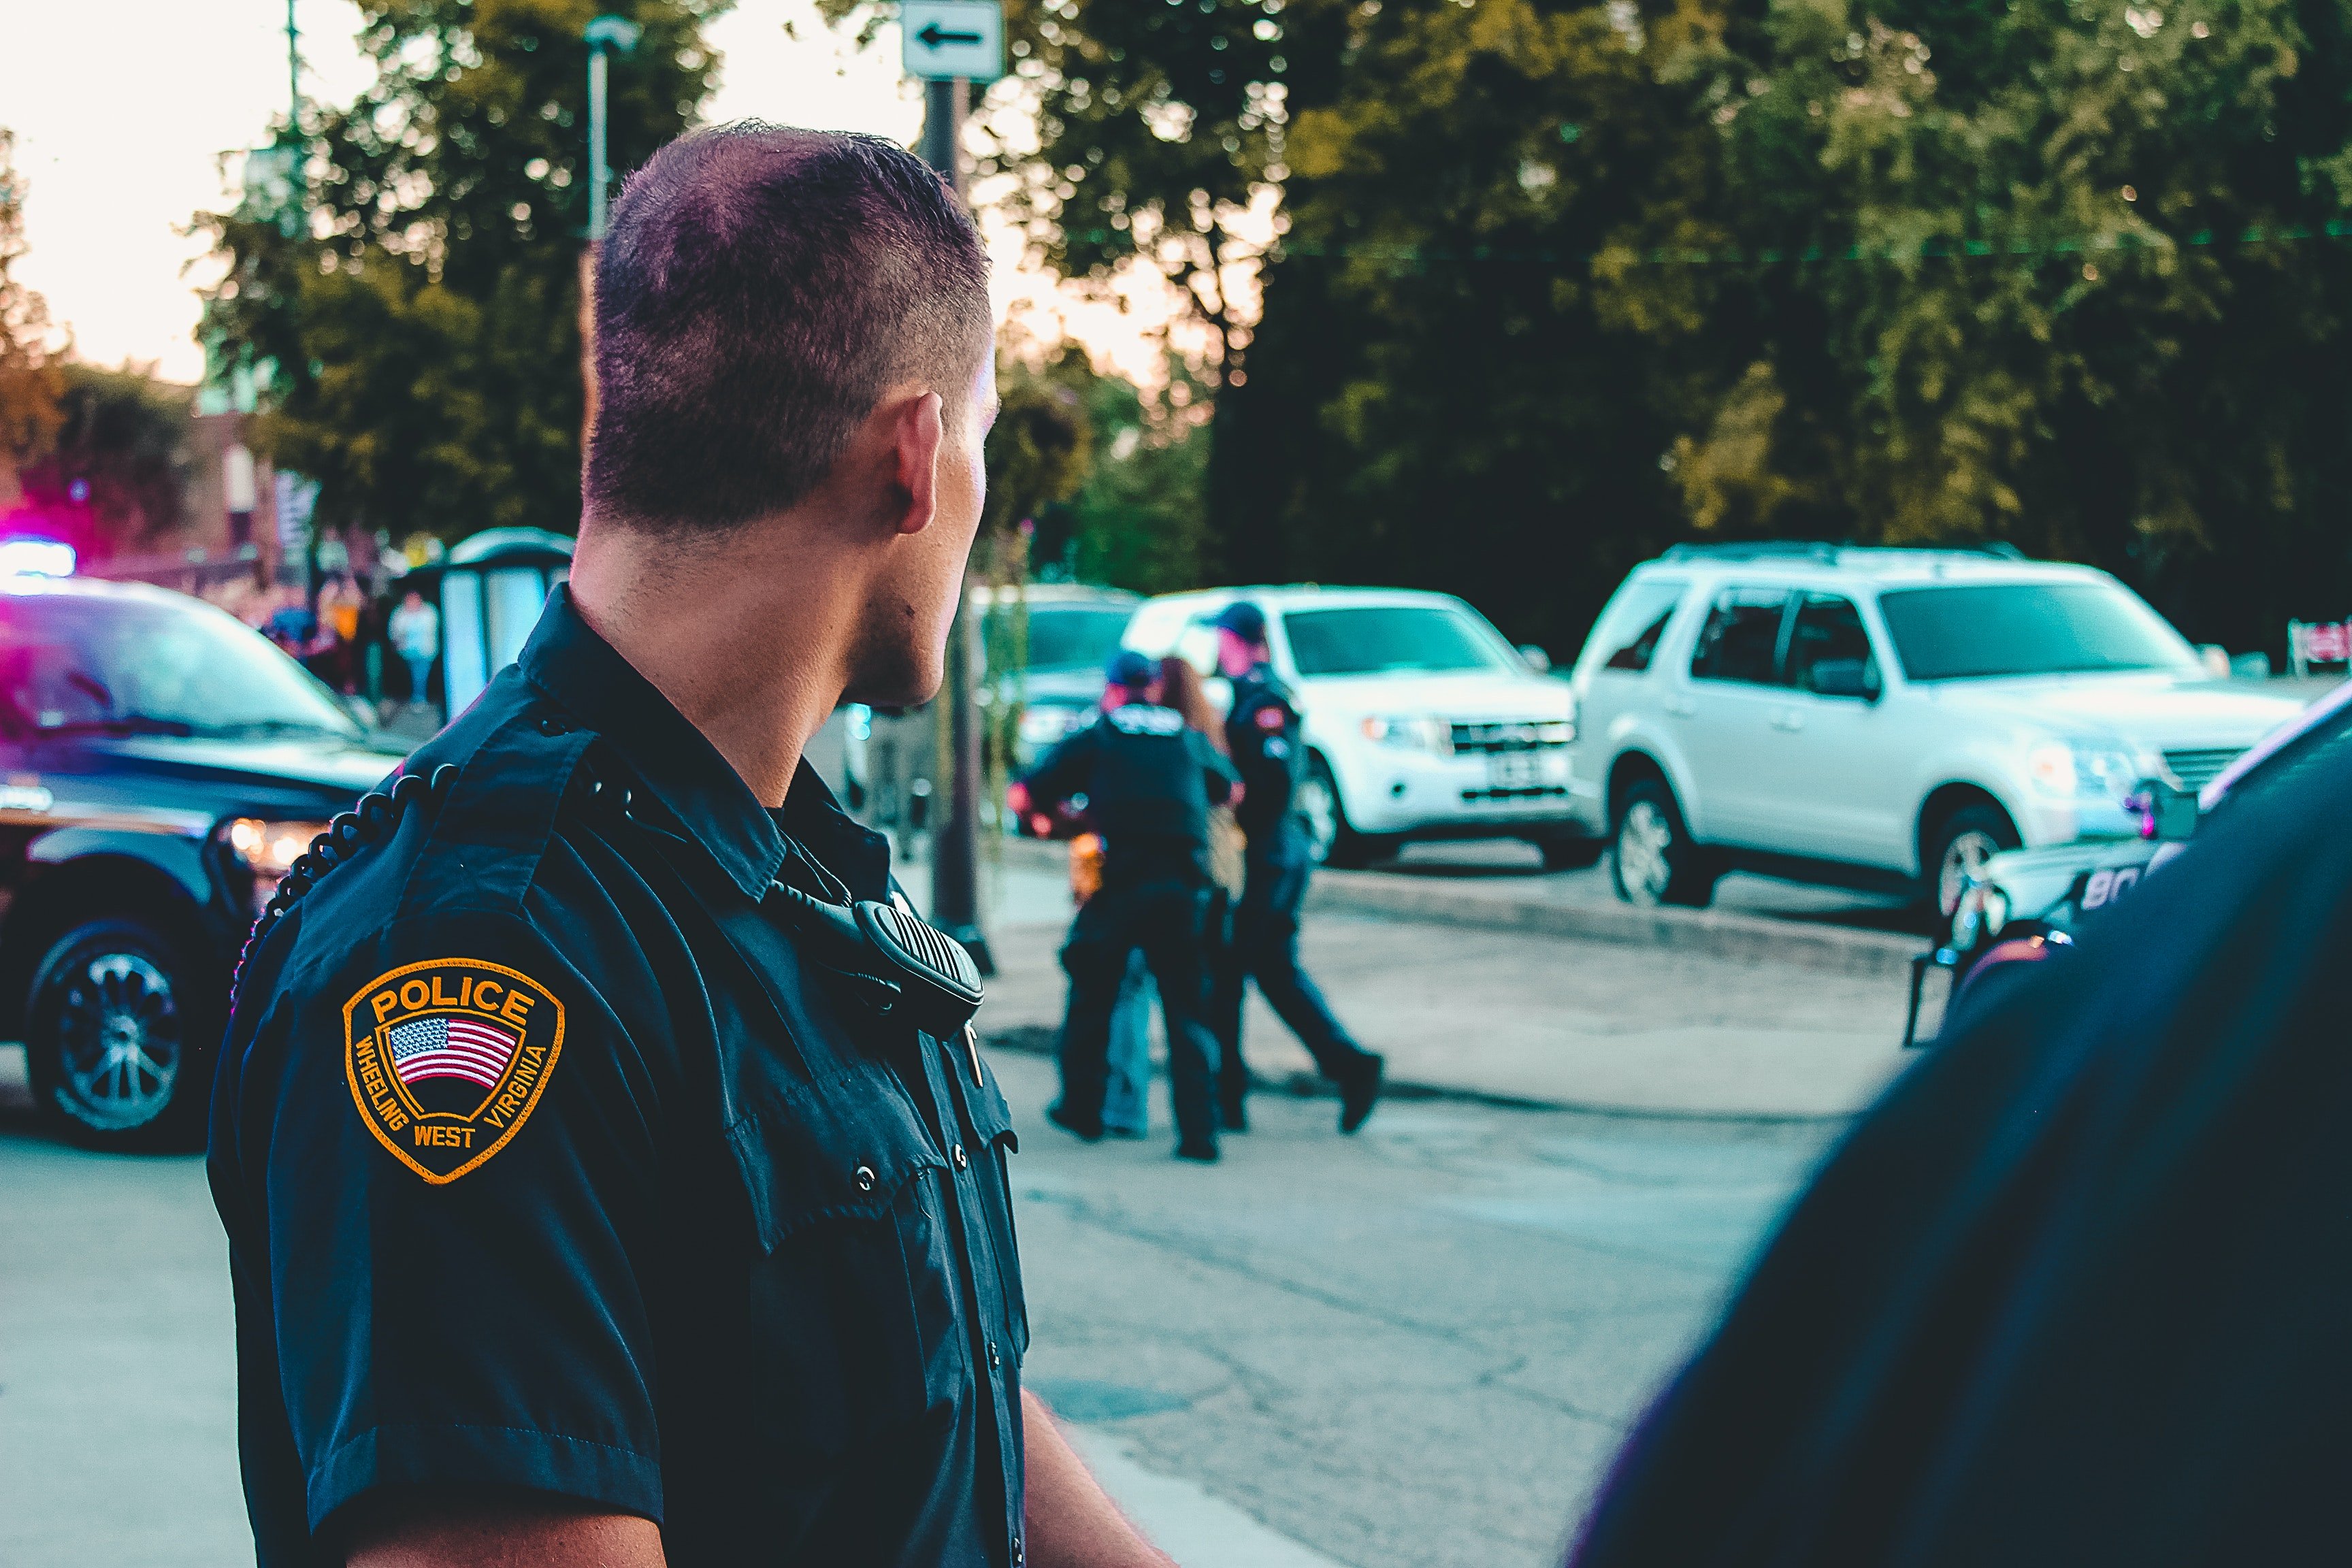 A police officer looking the other way. | Photo: Pexels/ Johno